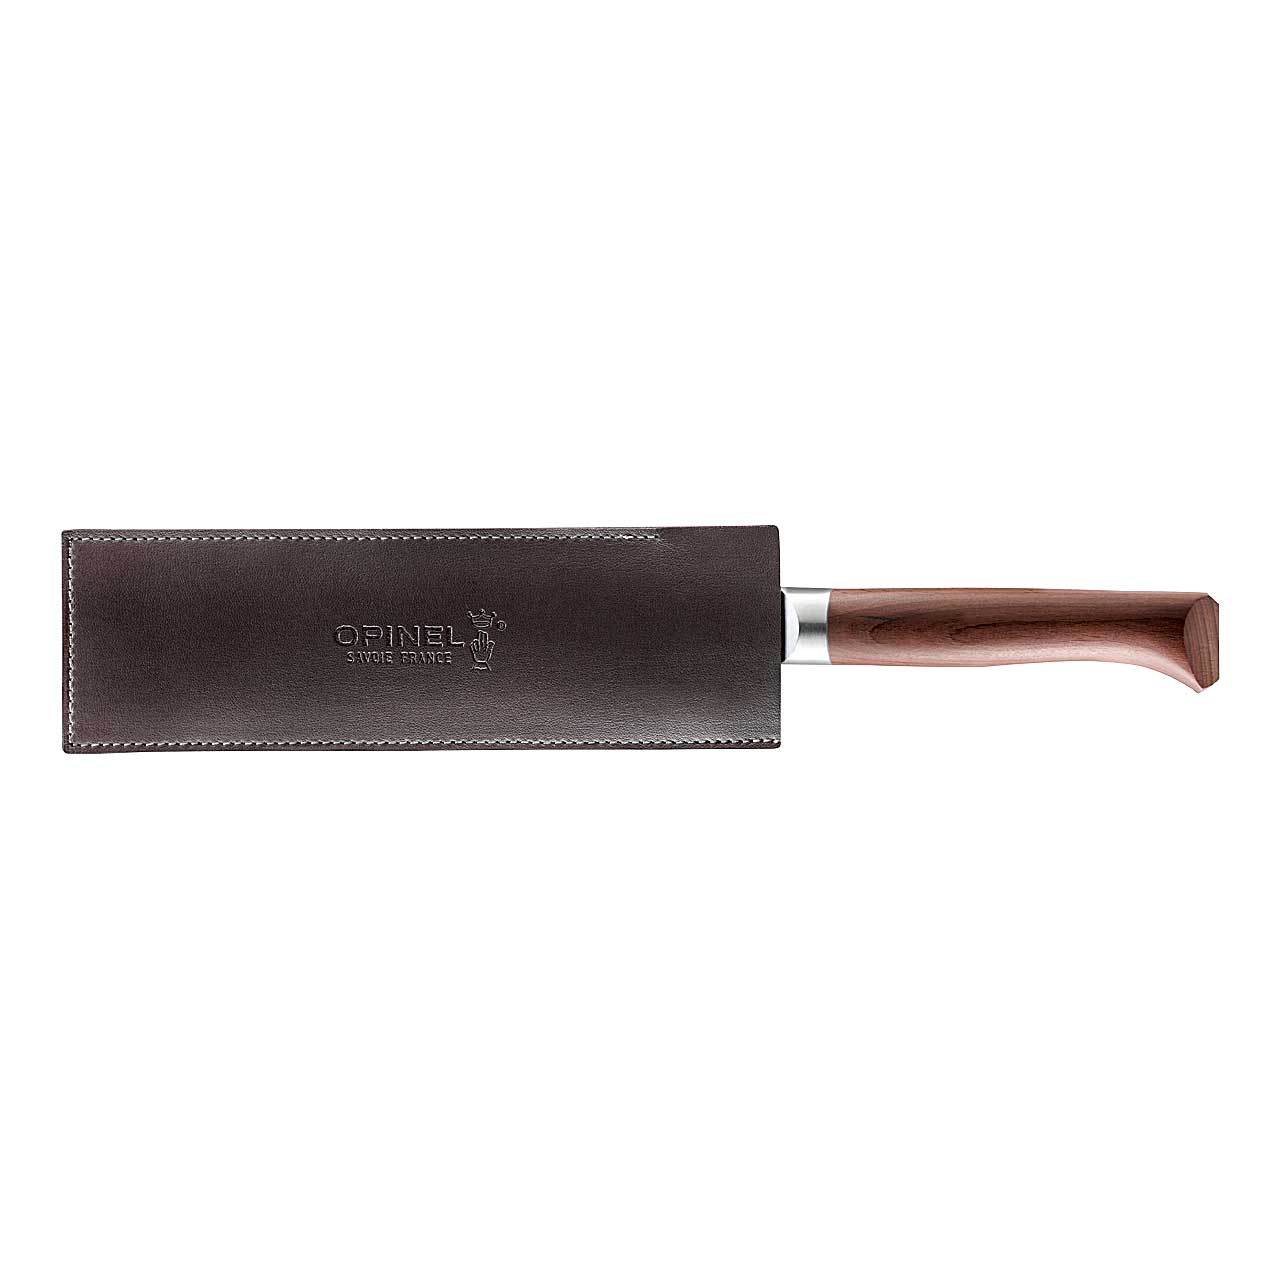 Opinel FORGES 1890, Tranchiermesser - 254545